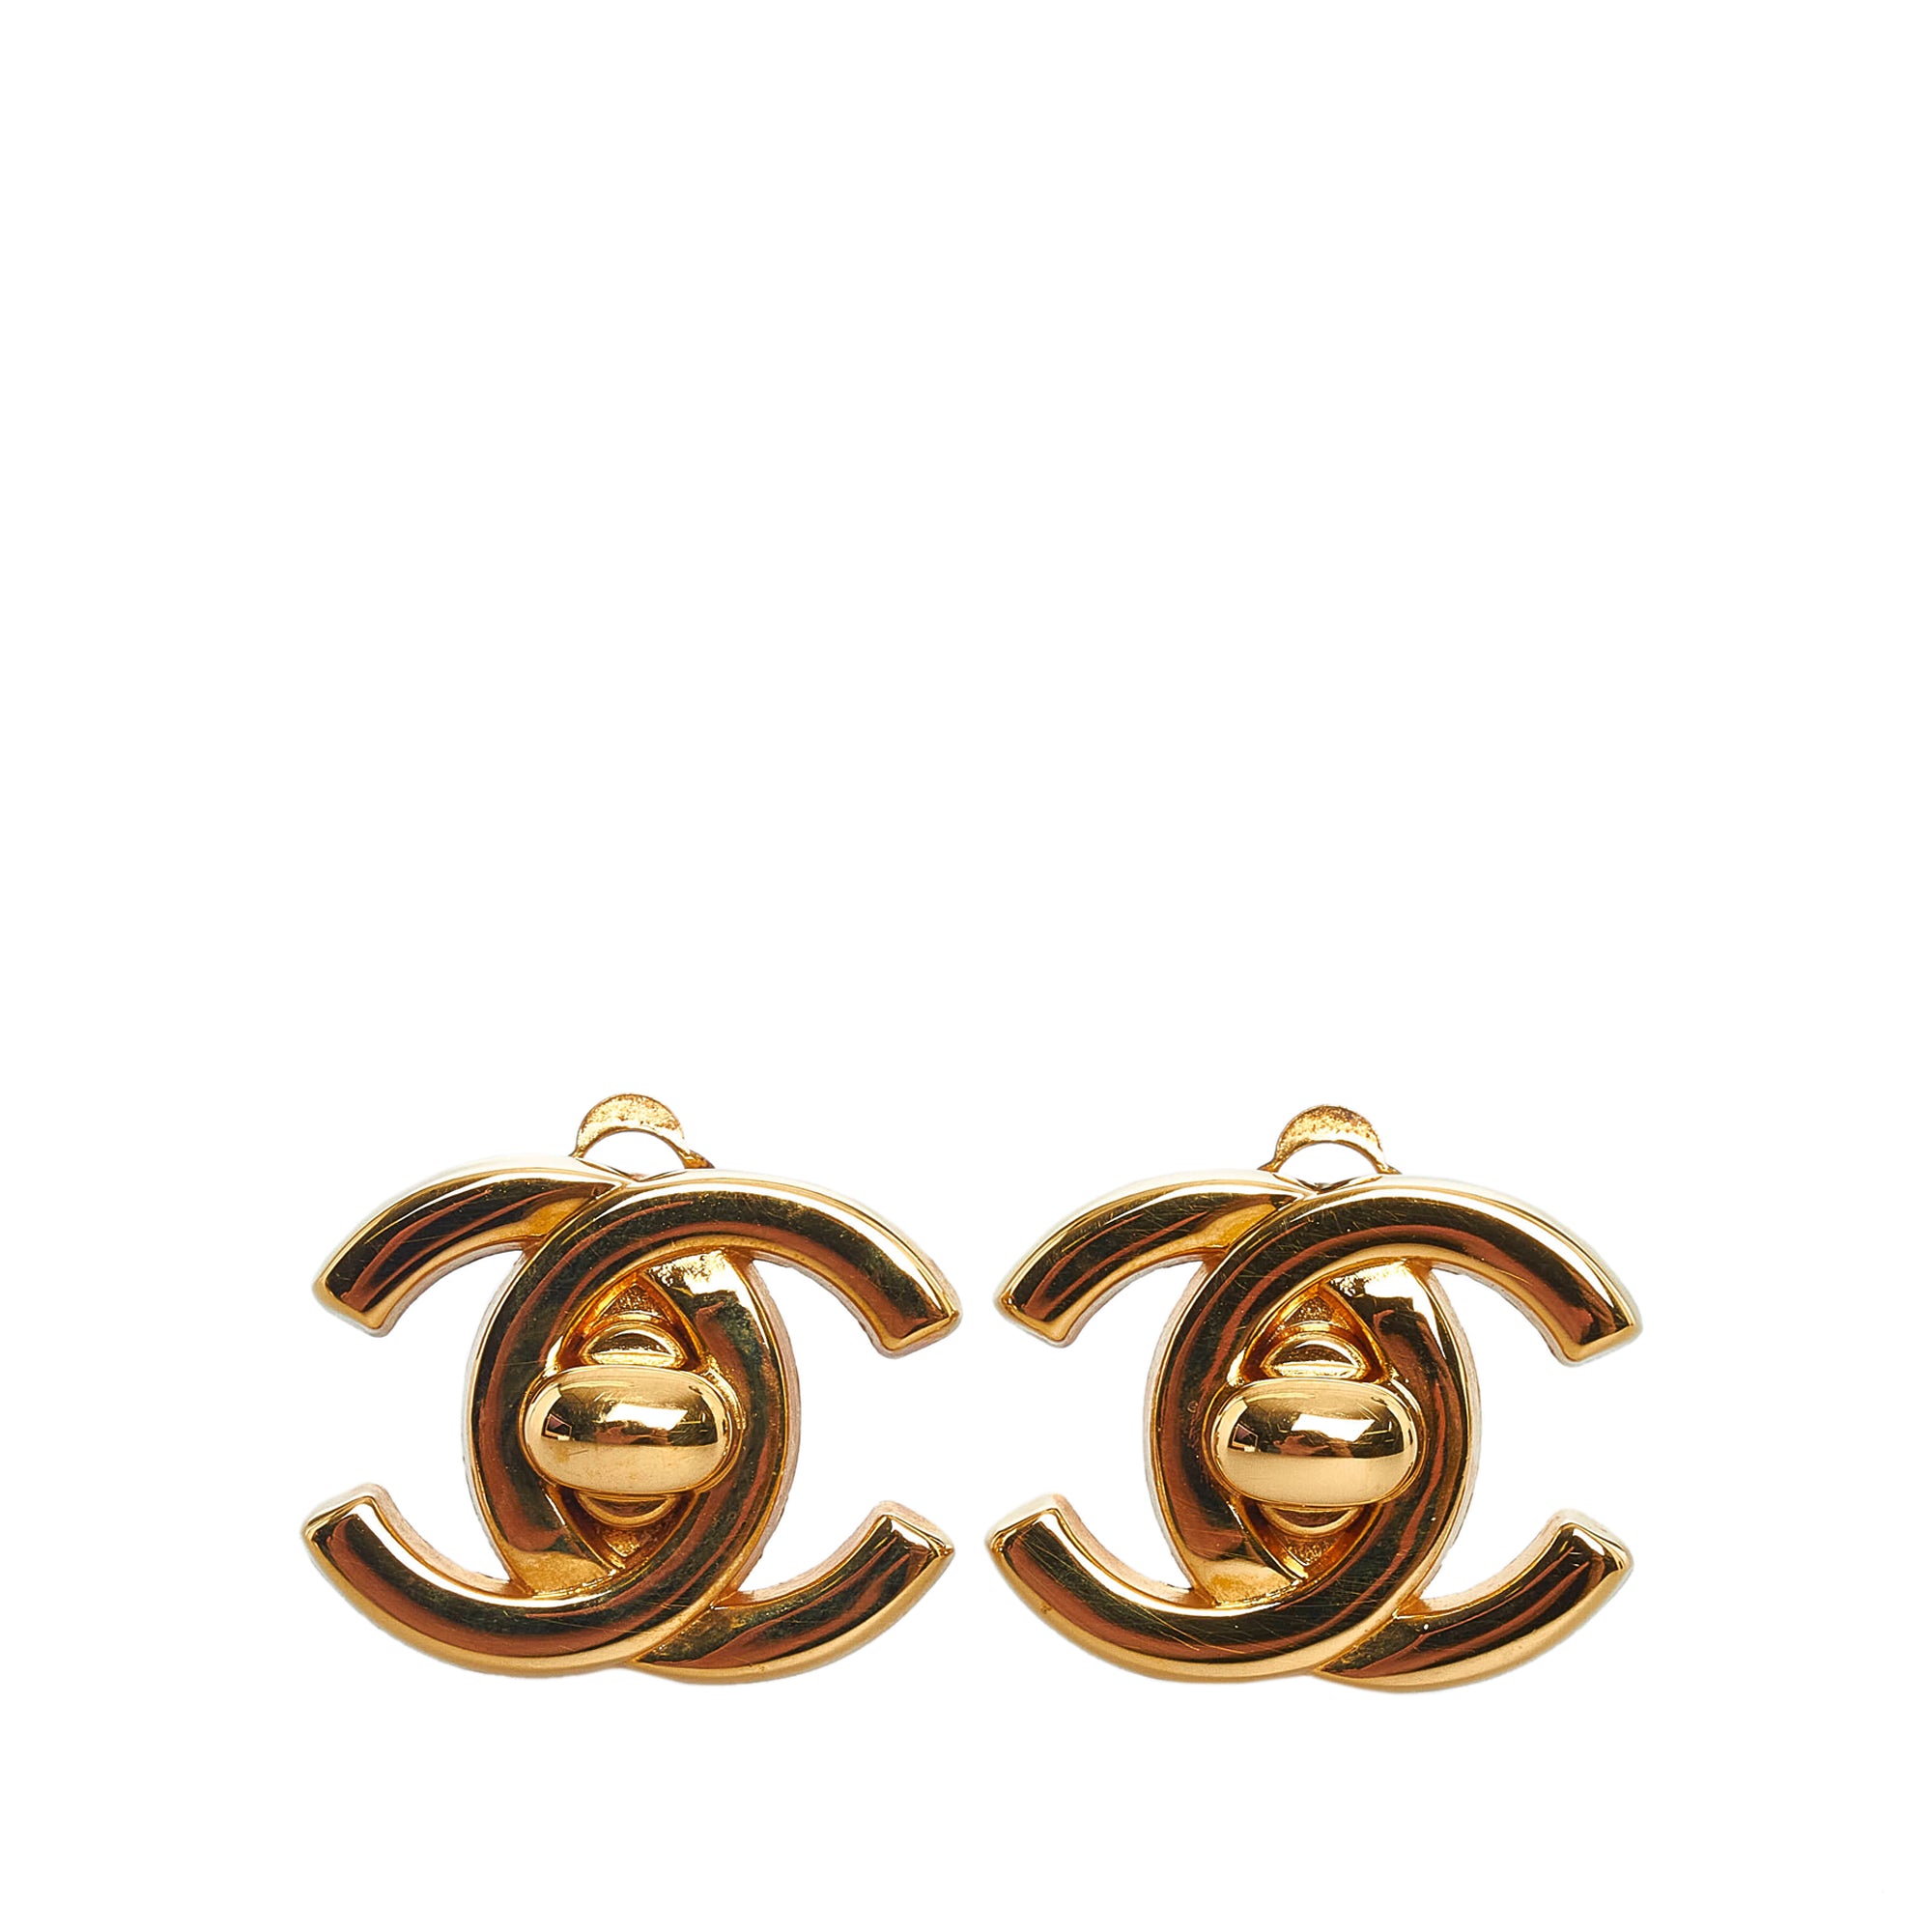 Chanel Earrings Gold Coco Mark Design GP B20 A CHANEL Ladies Clip Type